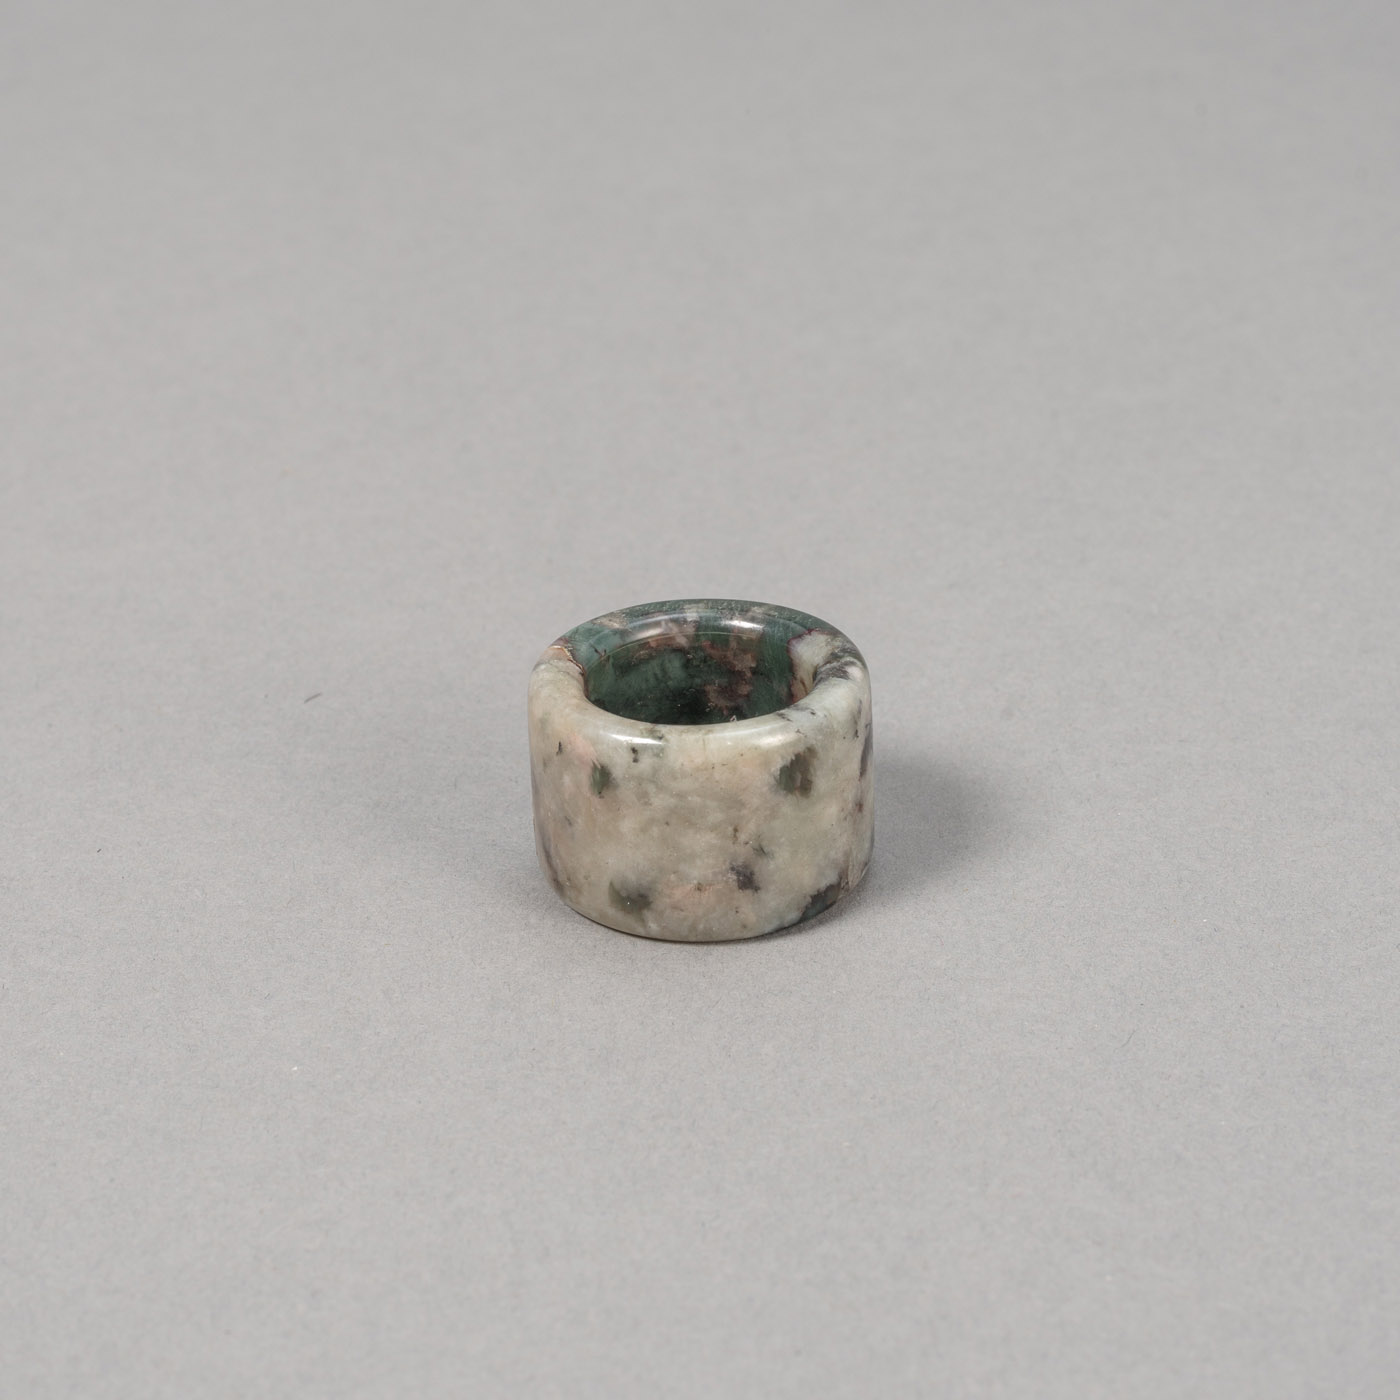 <b>ARCHER'S RING MADE OF GREEN-GREY MOTTLED STONE</b>